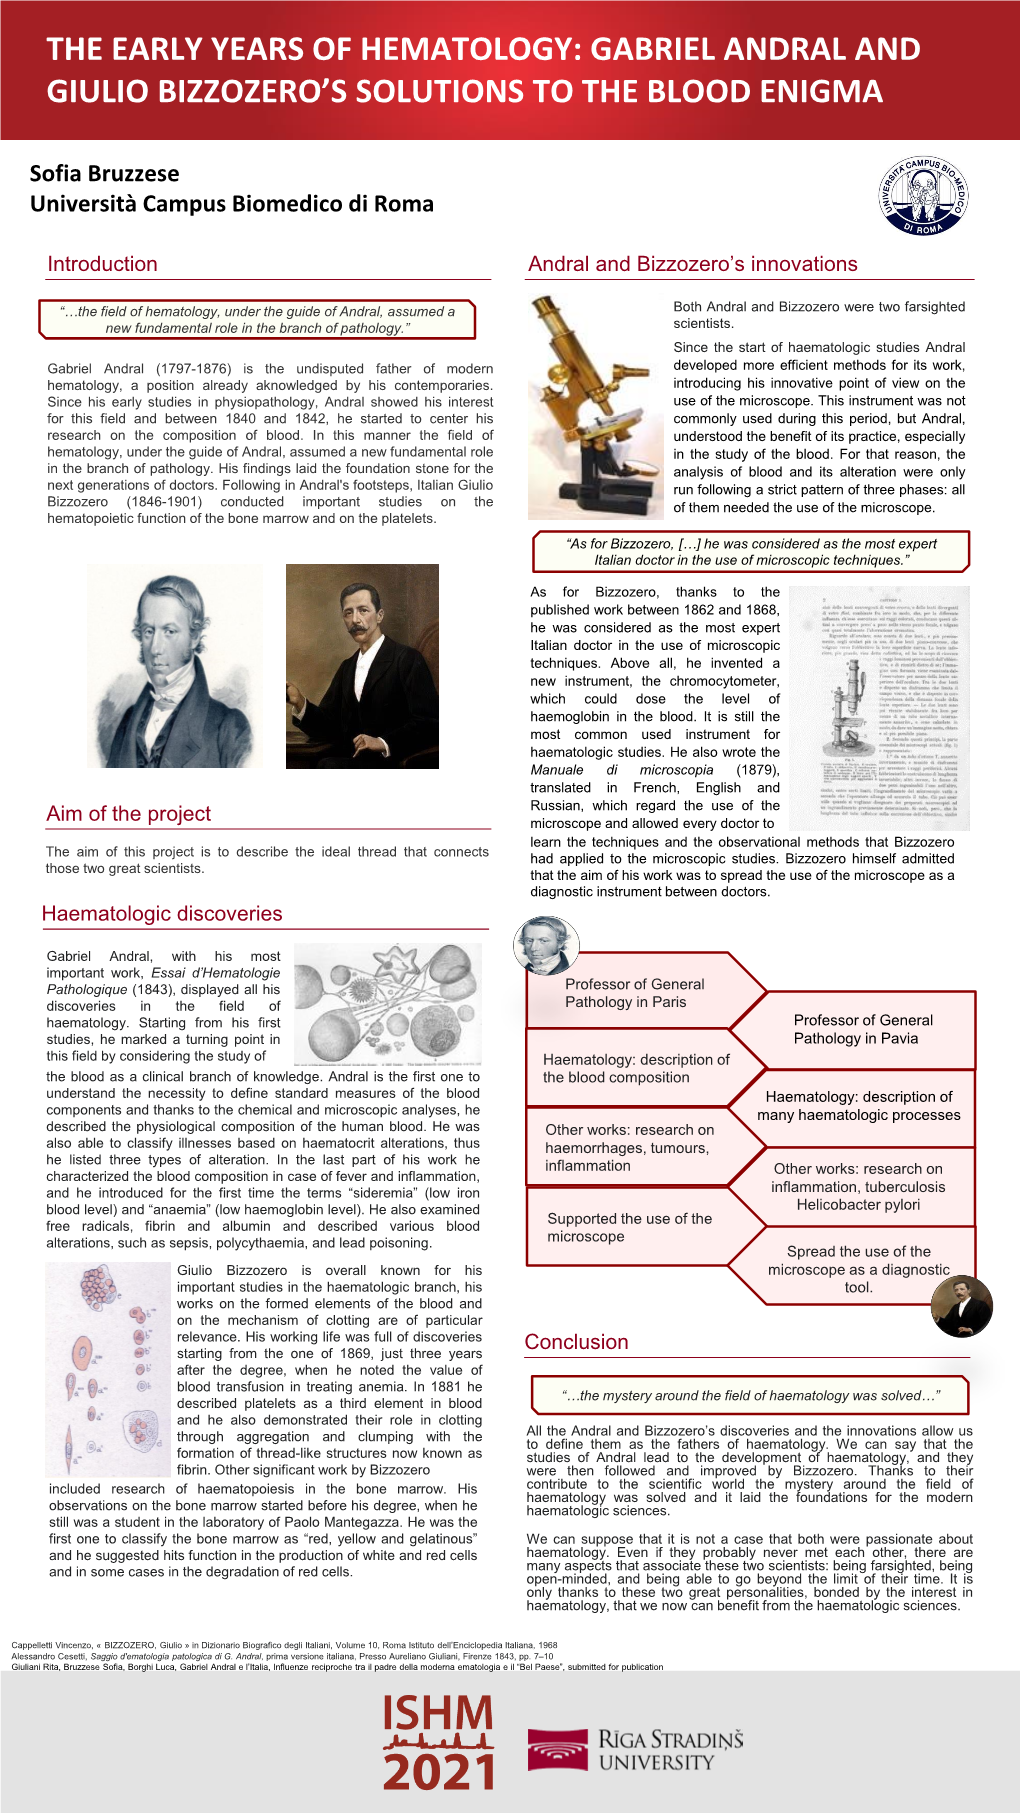 The Early Years of Hematology: Gabriel Andral and Giulio Bizzozero’S Solutions to the Blood Enigma